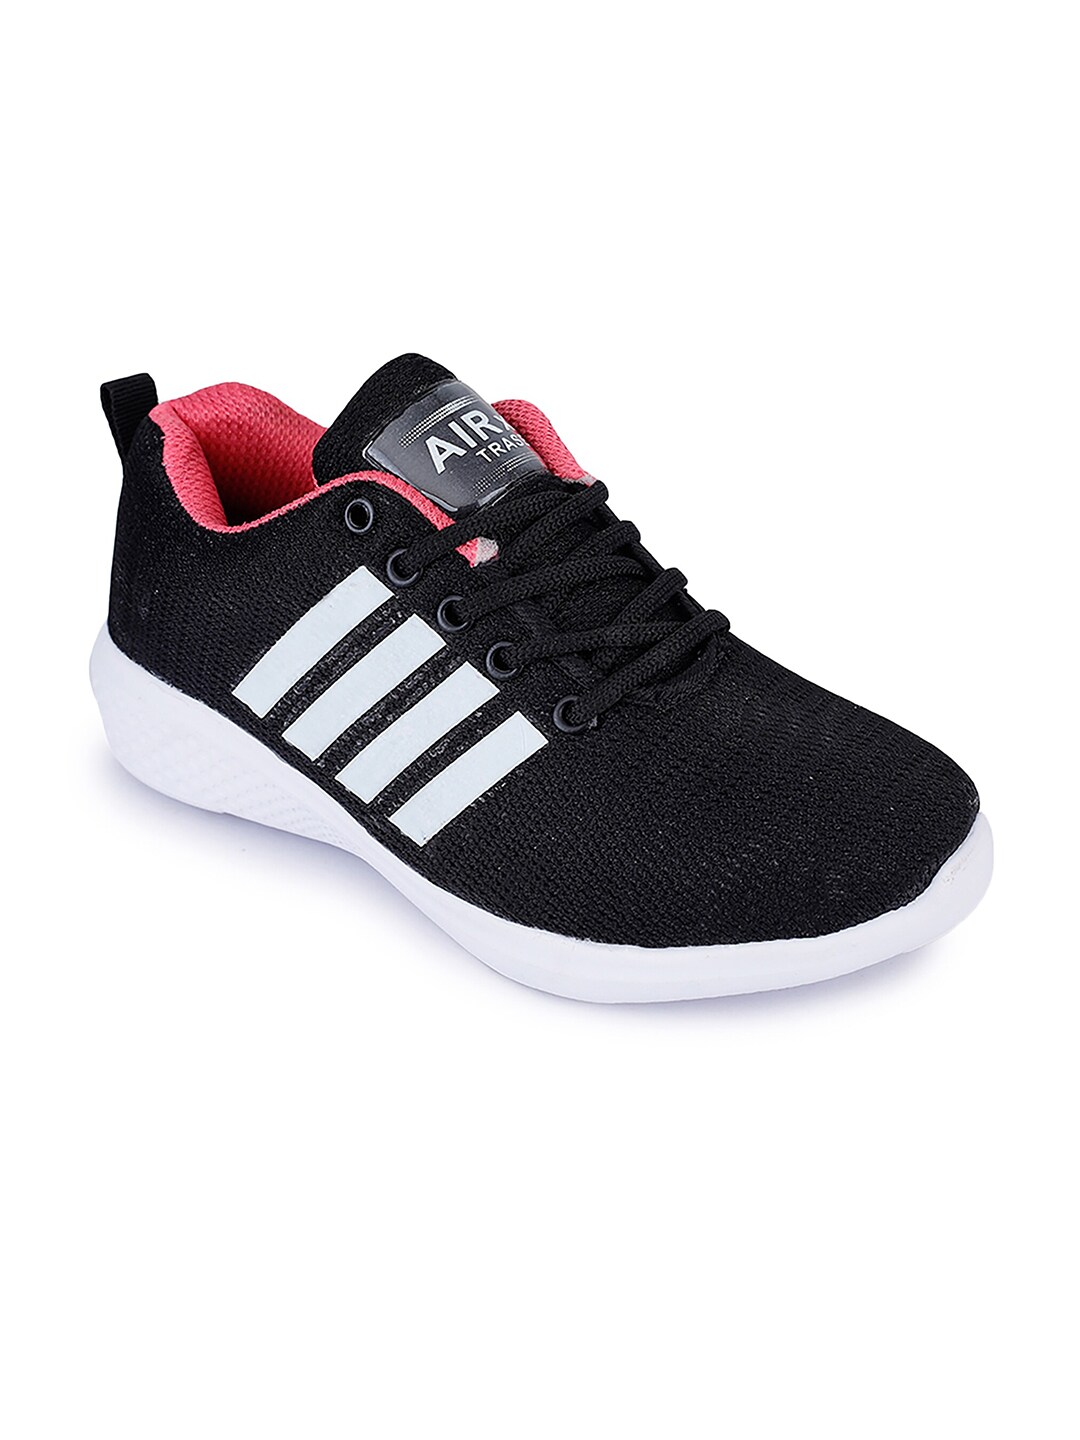 TRASE Women Black Running Shoes Price in India